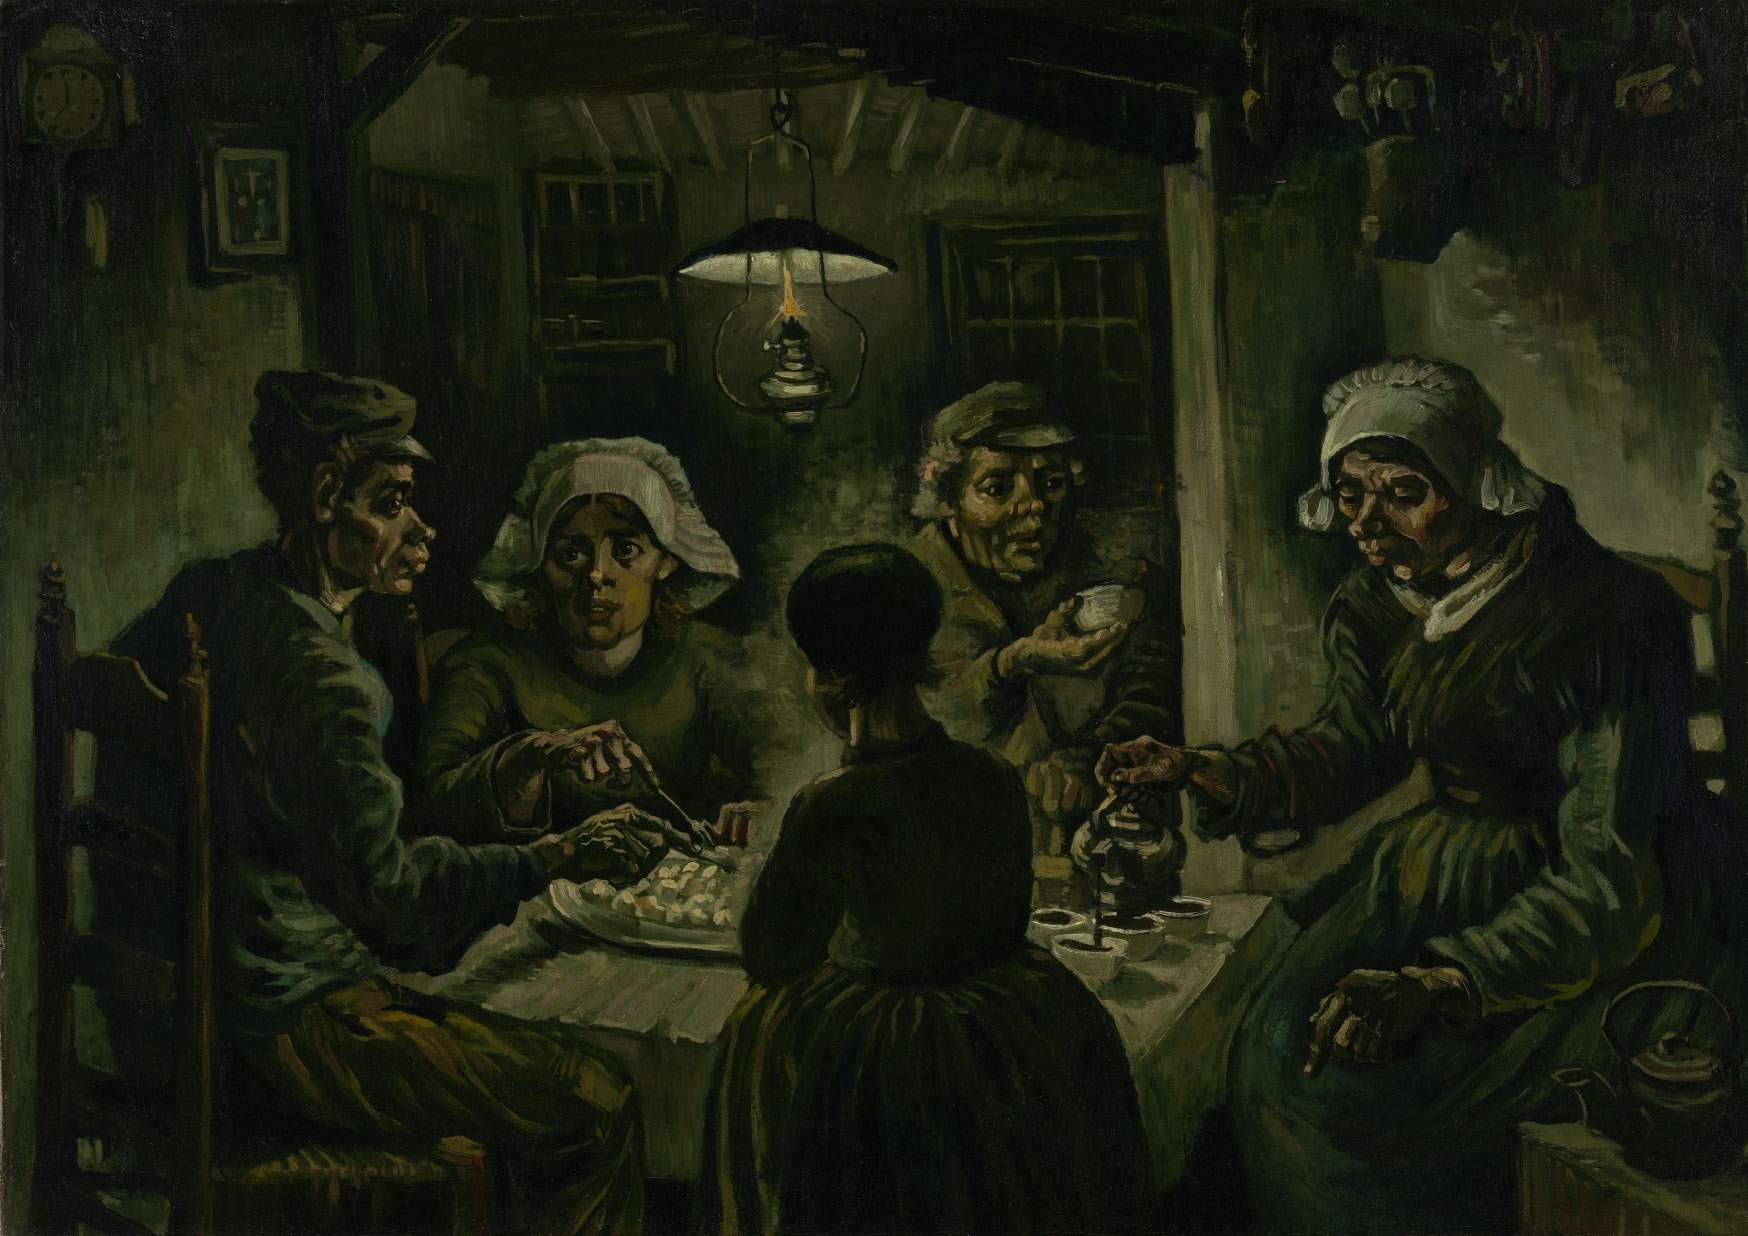 An exhibition-dossier on the Potato Eaters at the Van Gogh Museum in Amsterdam